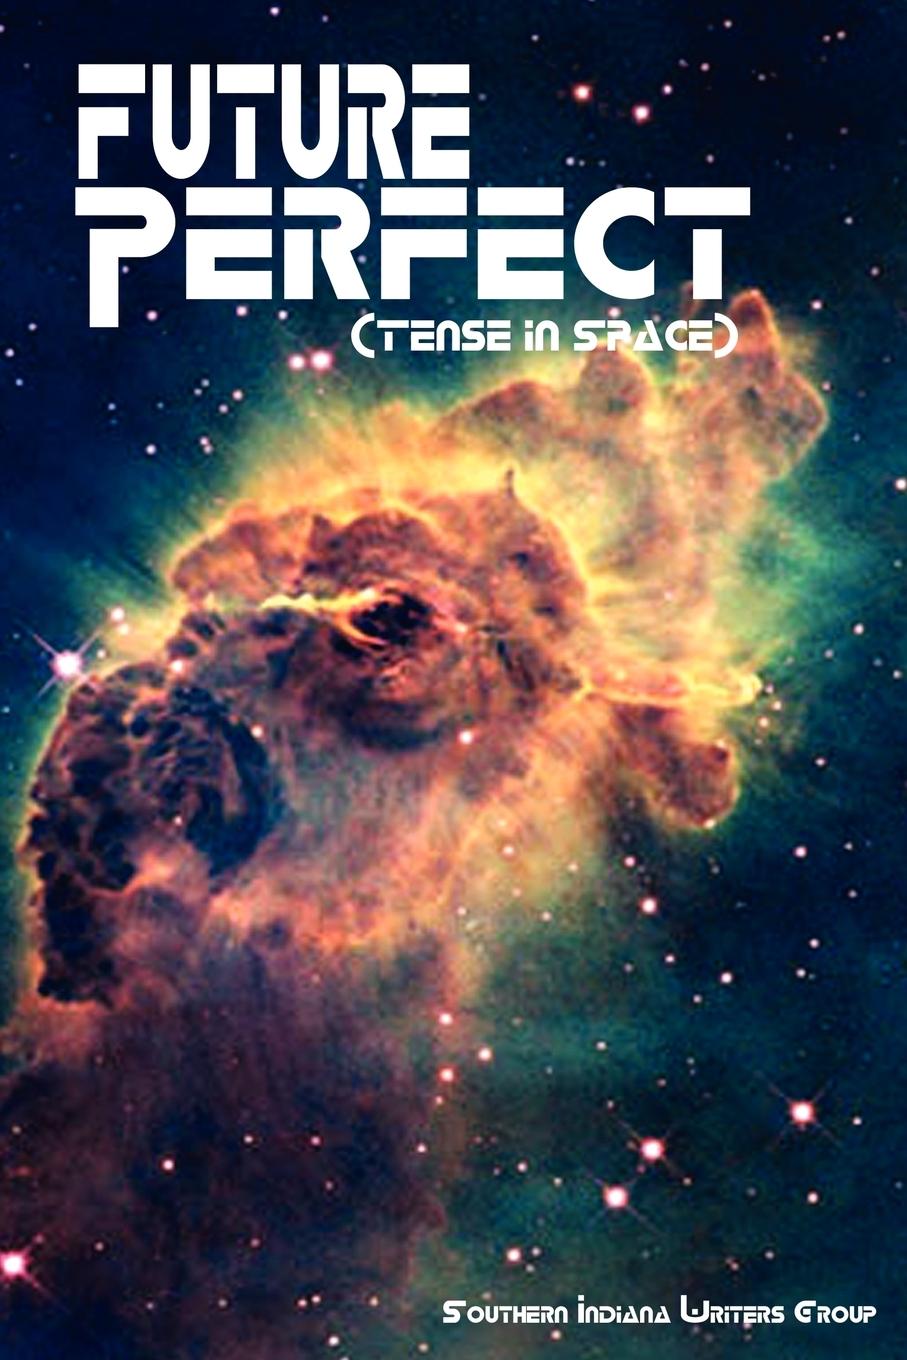 Future Perfect (Tense in Space) - Southern Indiana Writers